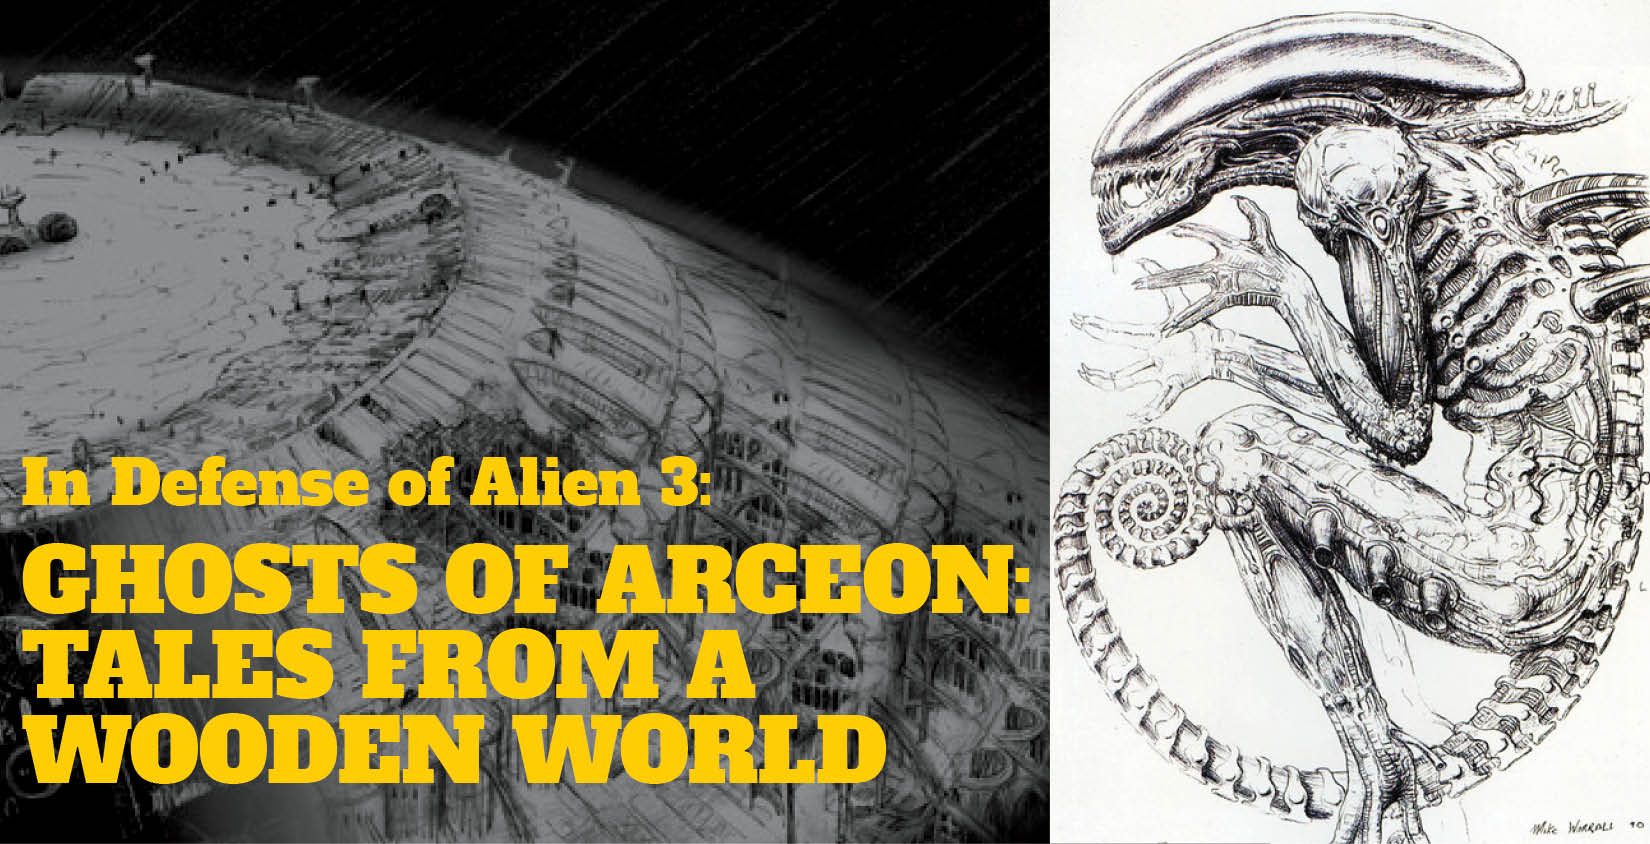 69 // Vincent Ward and the Wooden World (In Defense of Alien 3: Part 5)